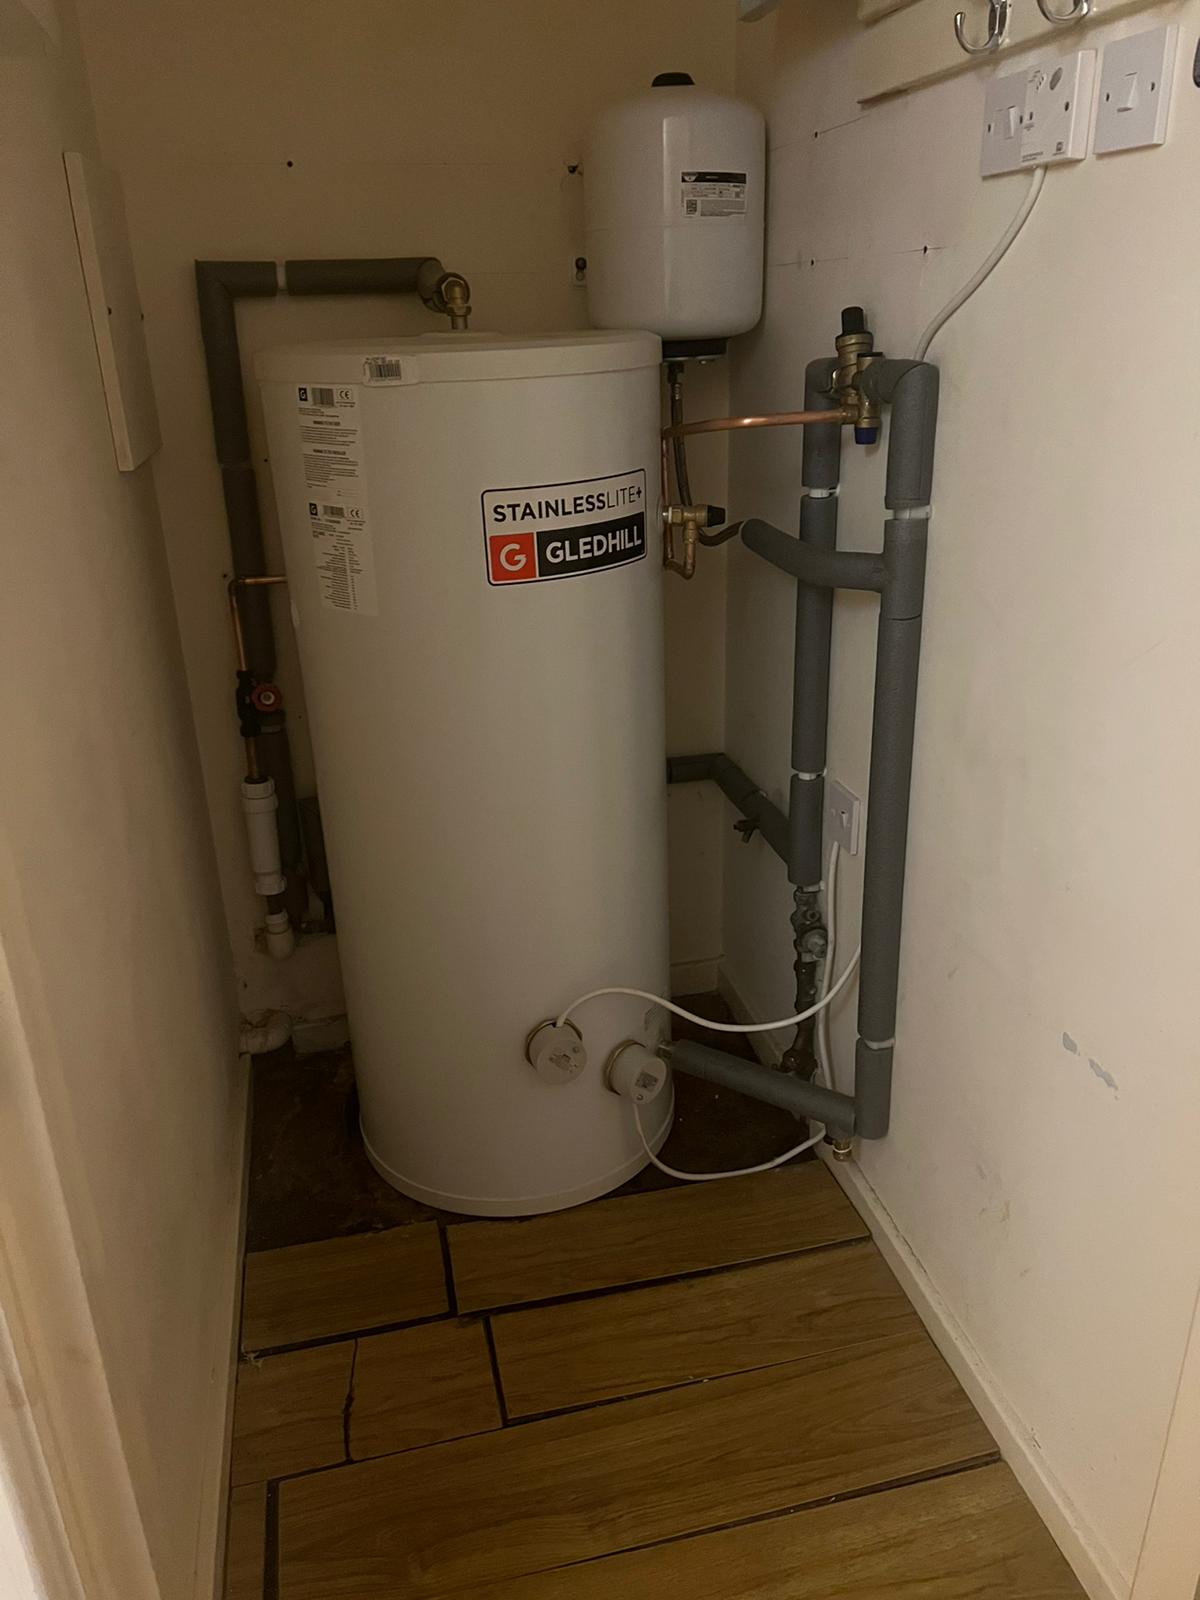 Faulty thermal store replaced with unvented hot water cylinder.